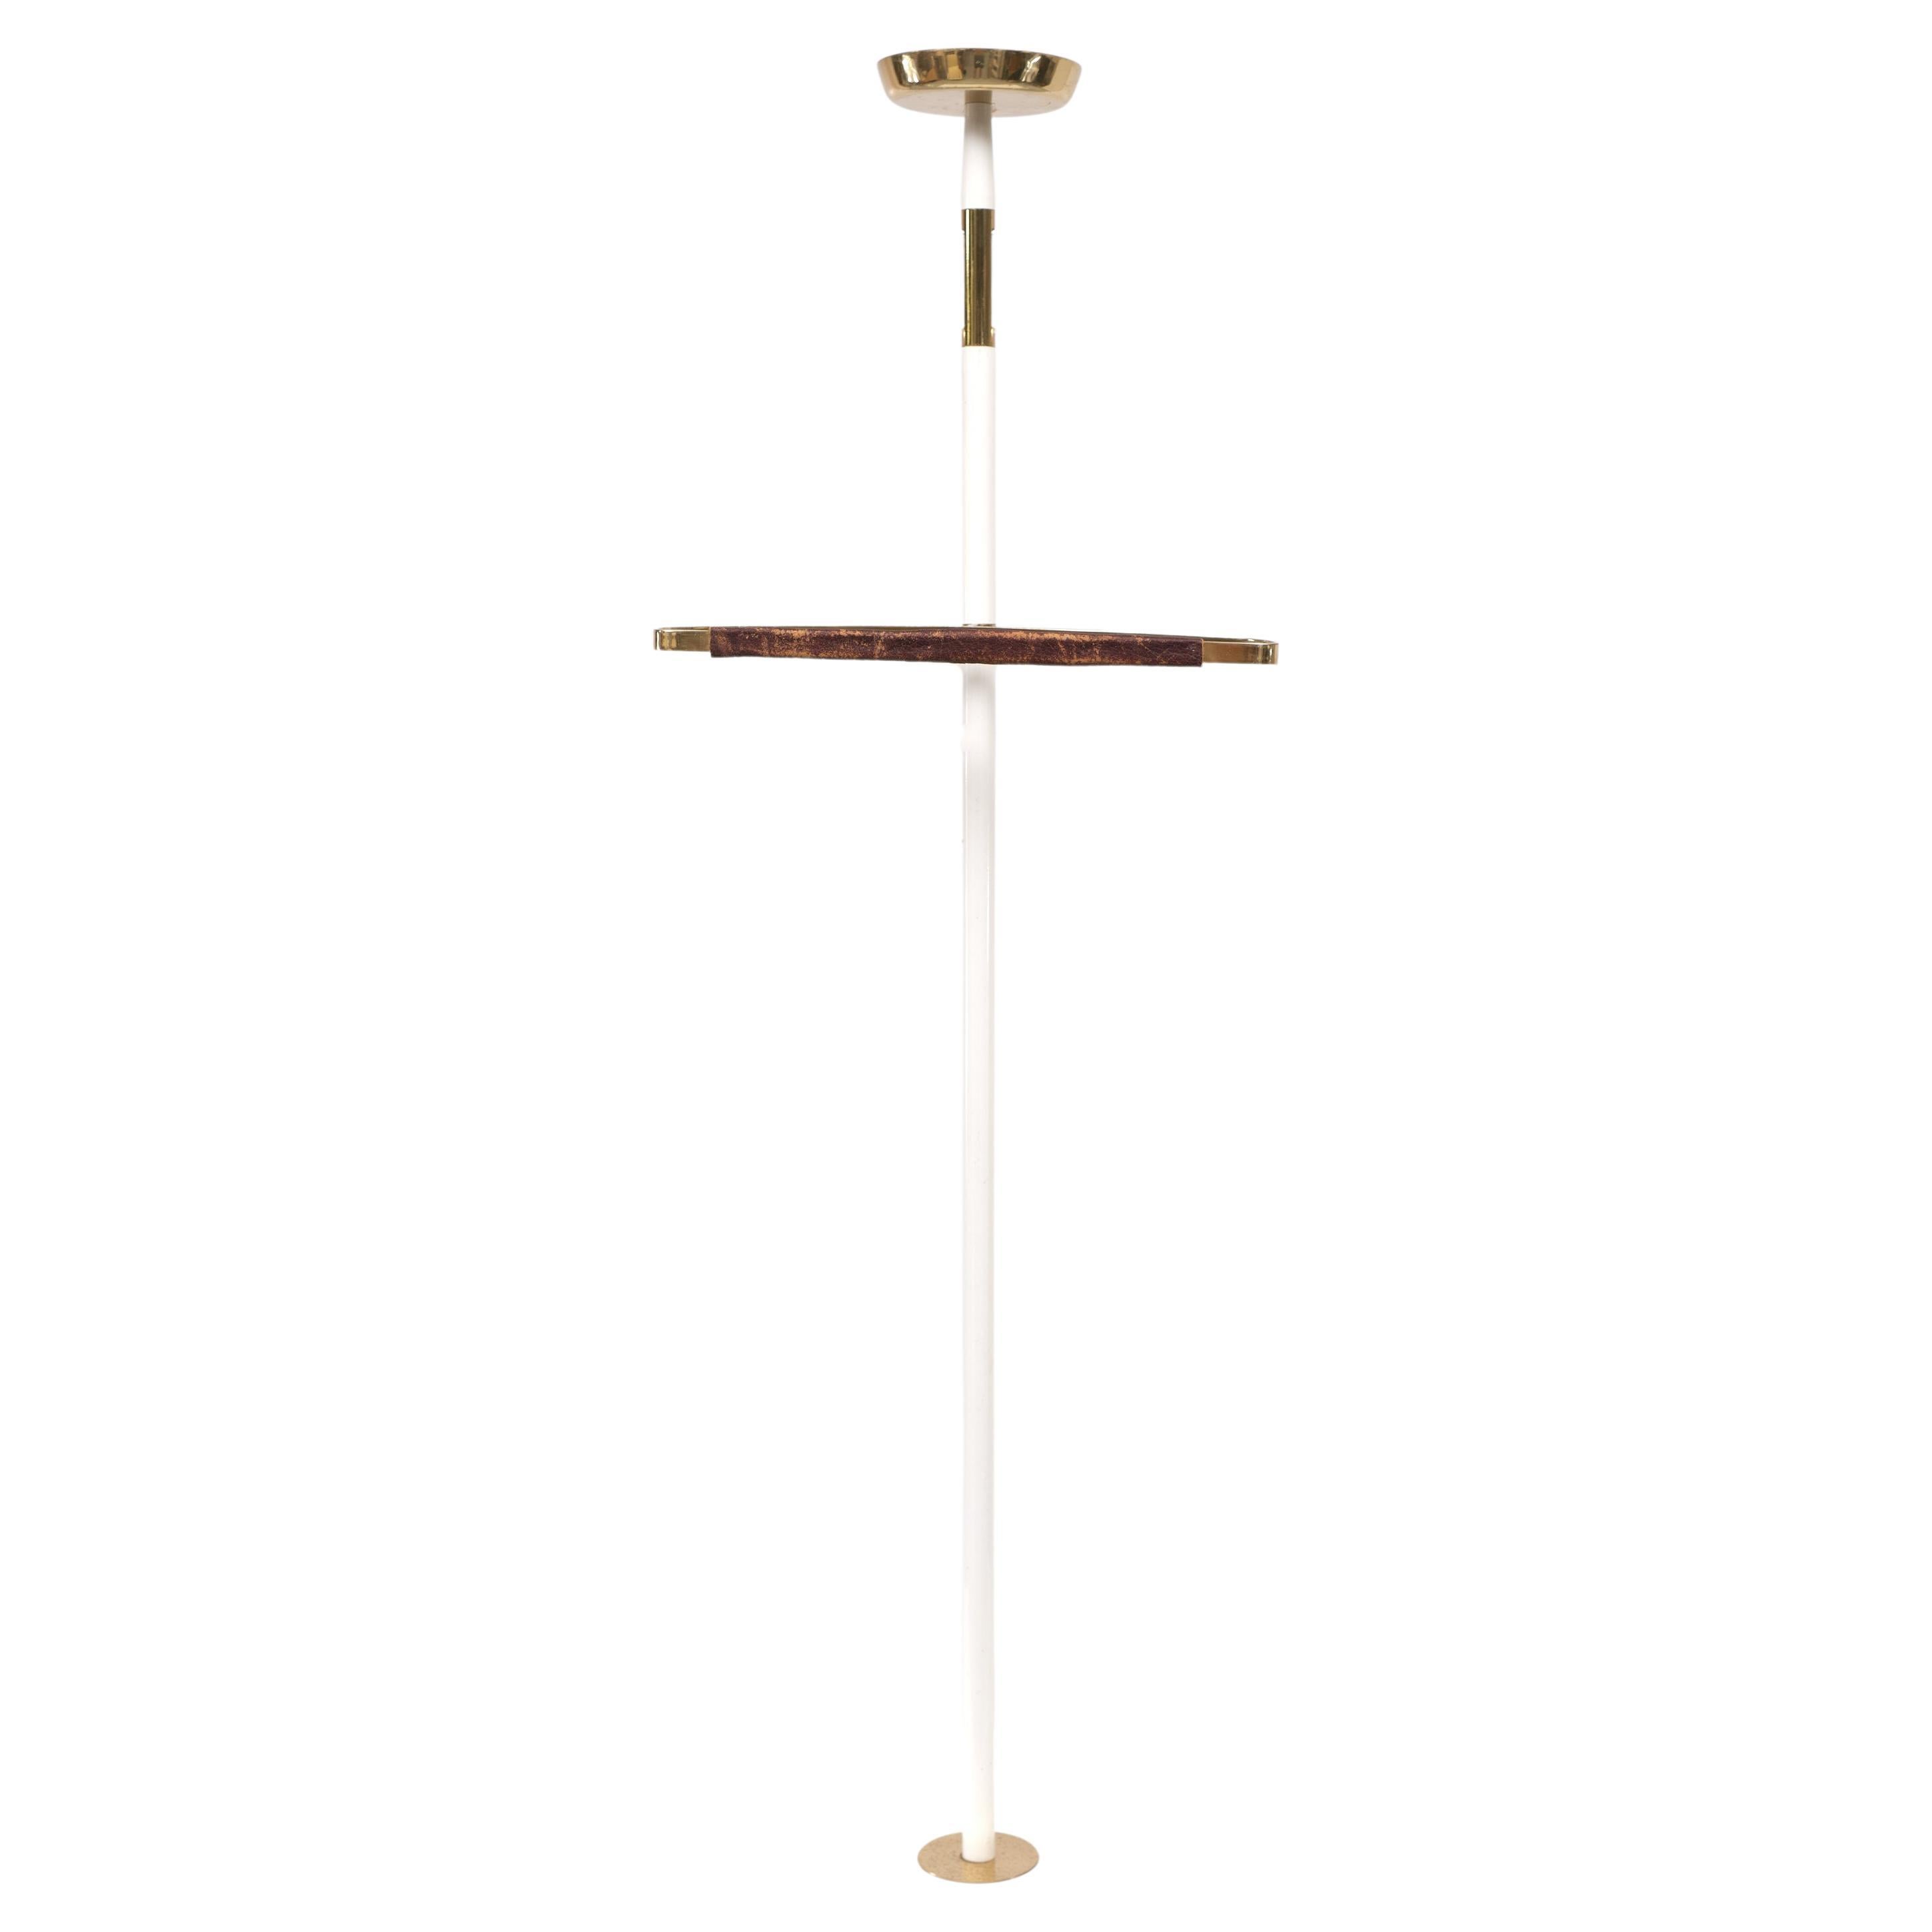 Very nice stylish valid stand . White upright comes with Brass details .Lucite 
coat hanger. Made by  Vereinigte Werkstätten München, Germany, circa 1955.  
 Please don't hesitate to reach out for alternative shipping quotes